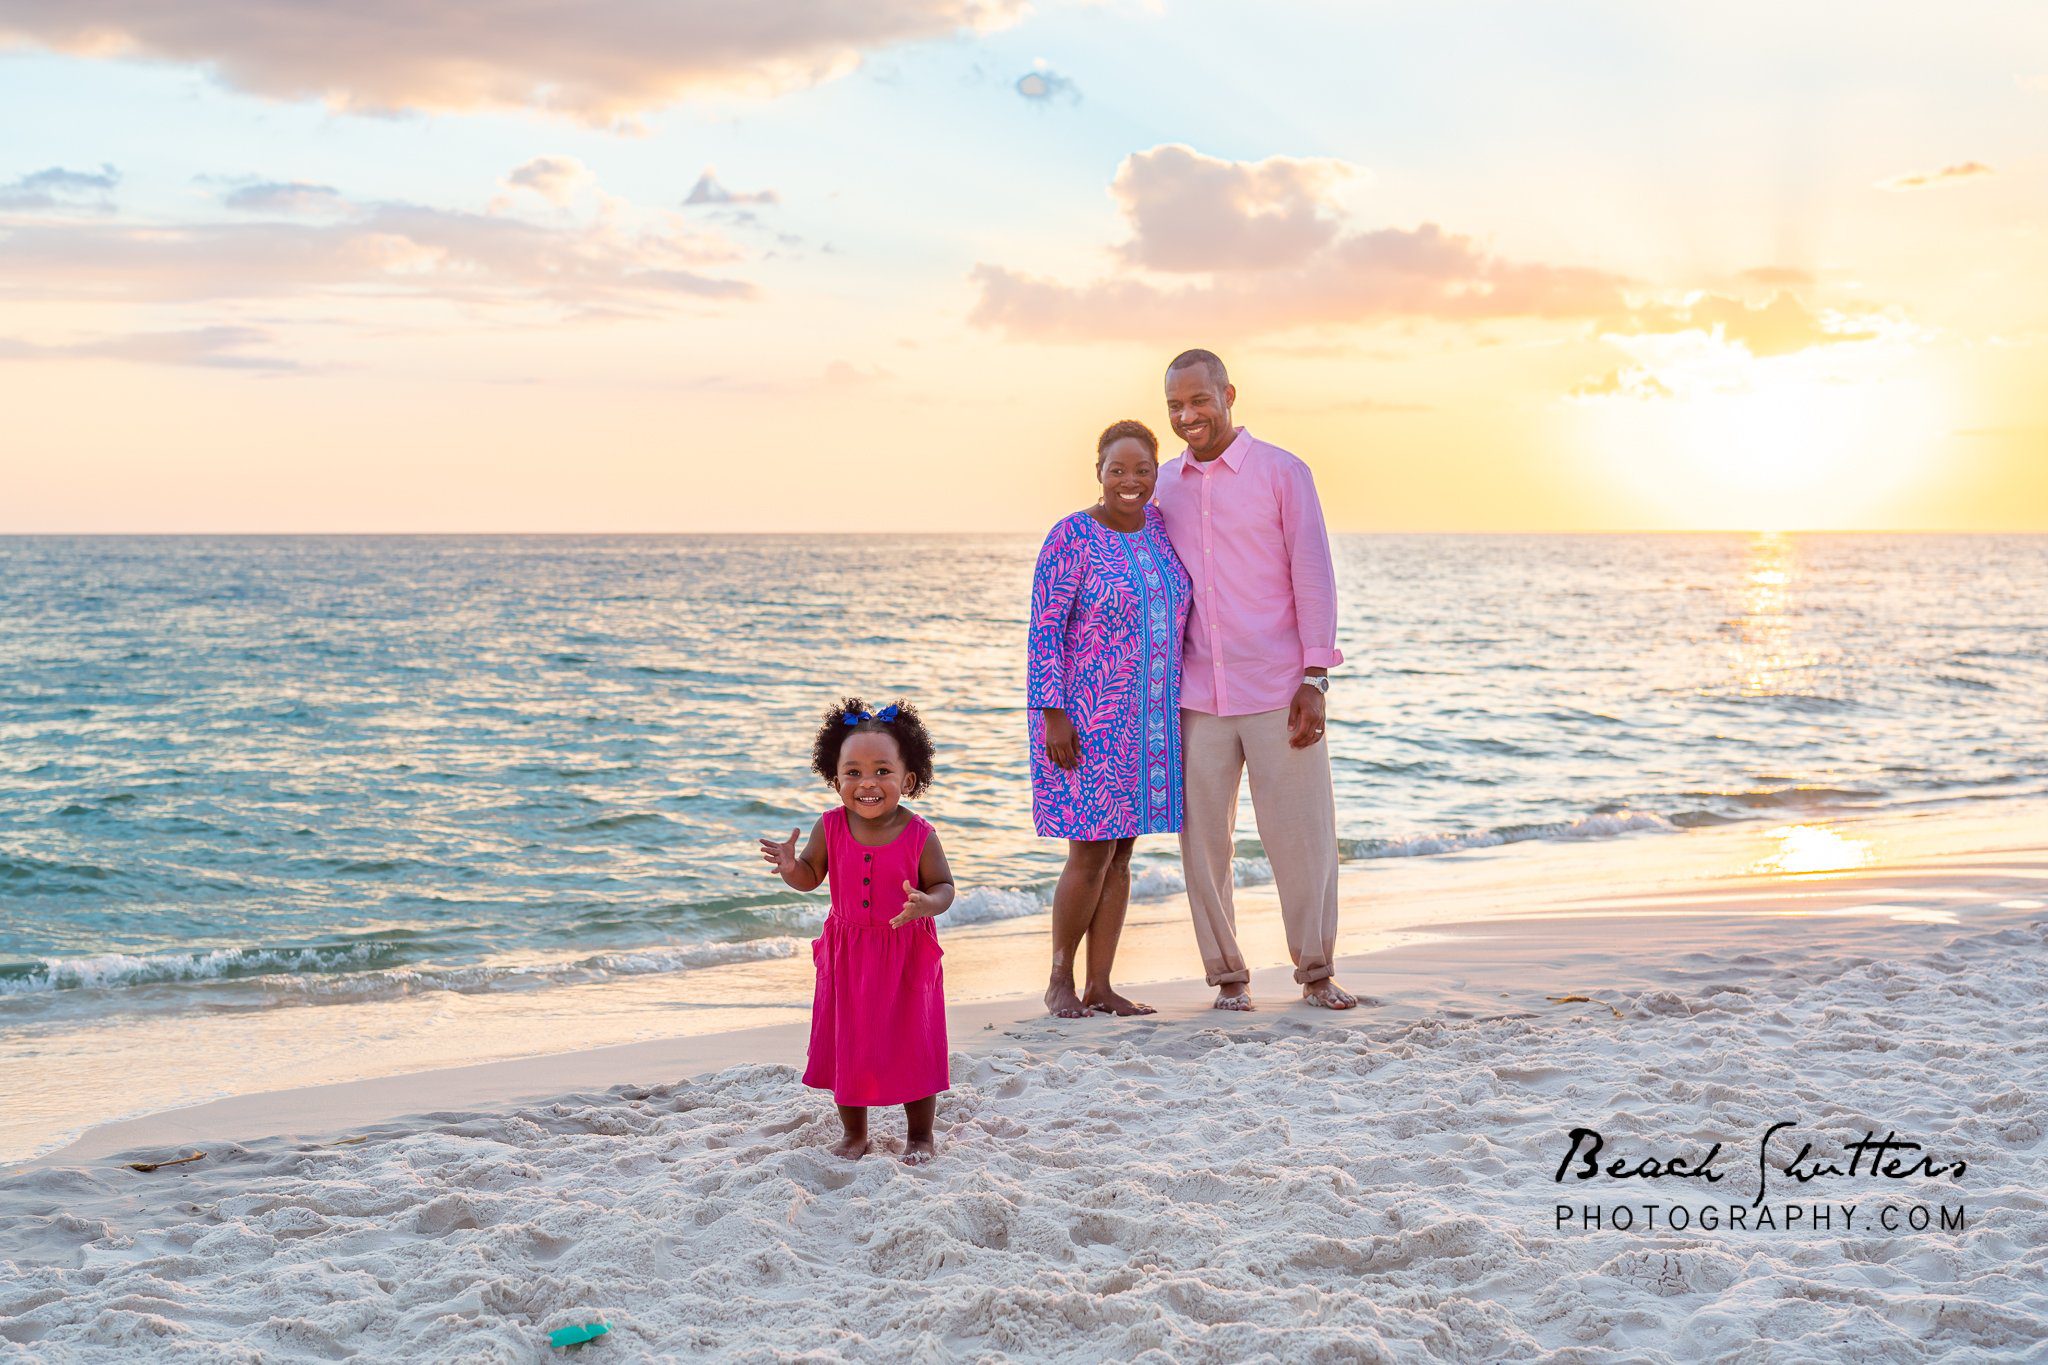 Tell your story with family photos at the beach